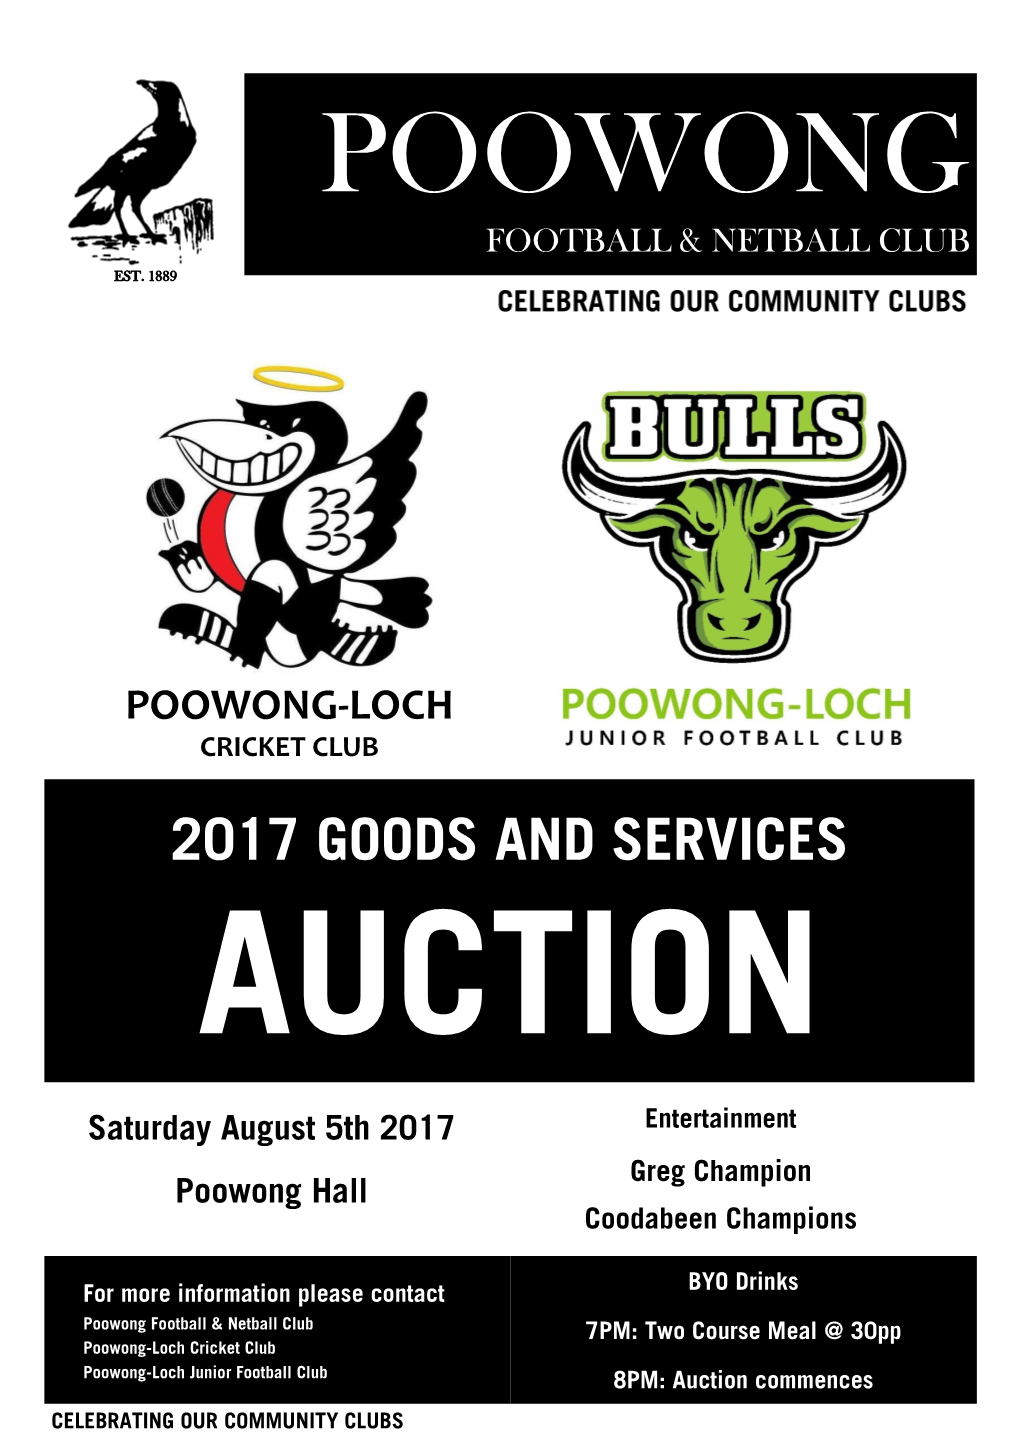 Poowong-Loch Cricket Club 2017 Goods and Services Auction